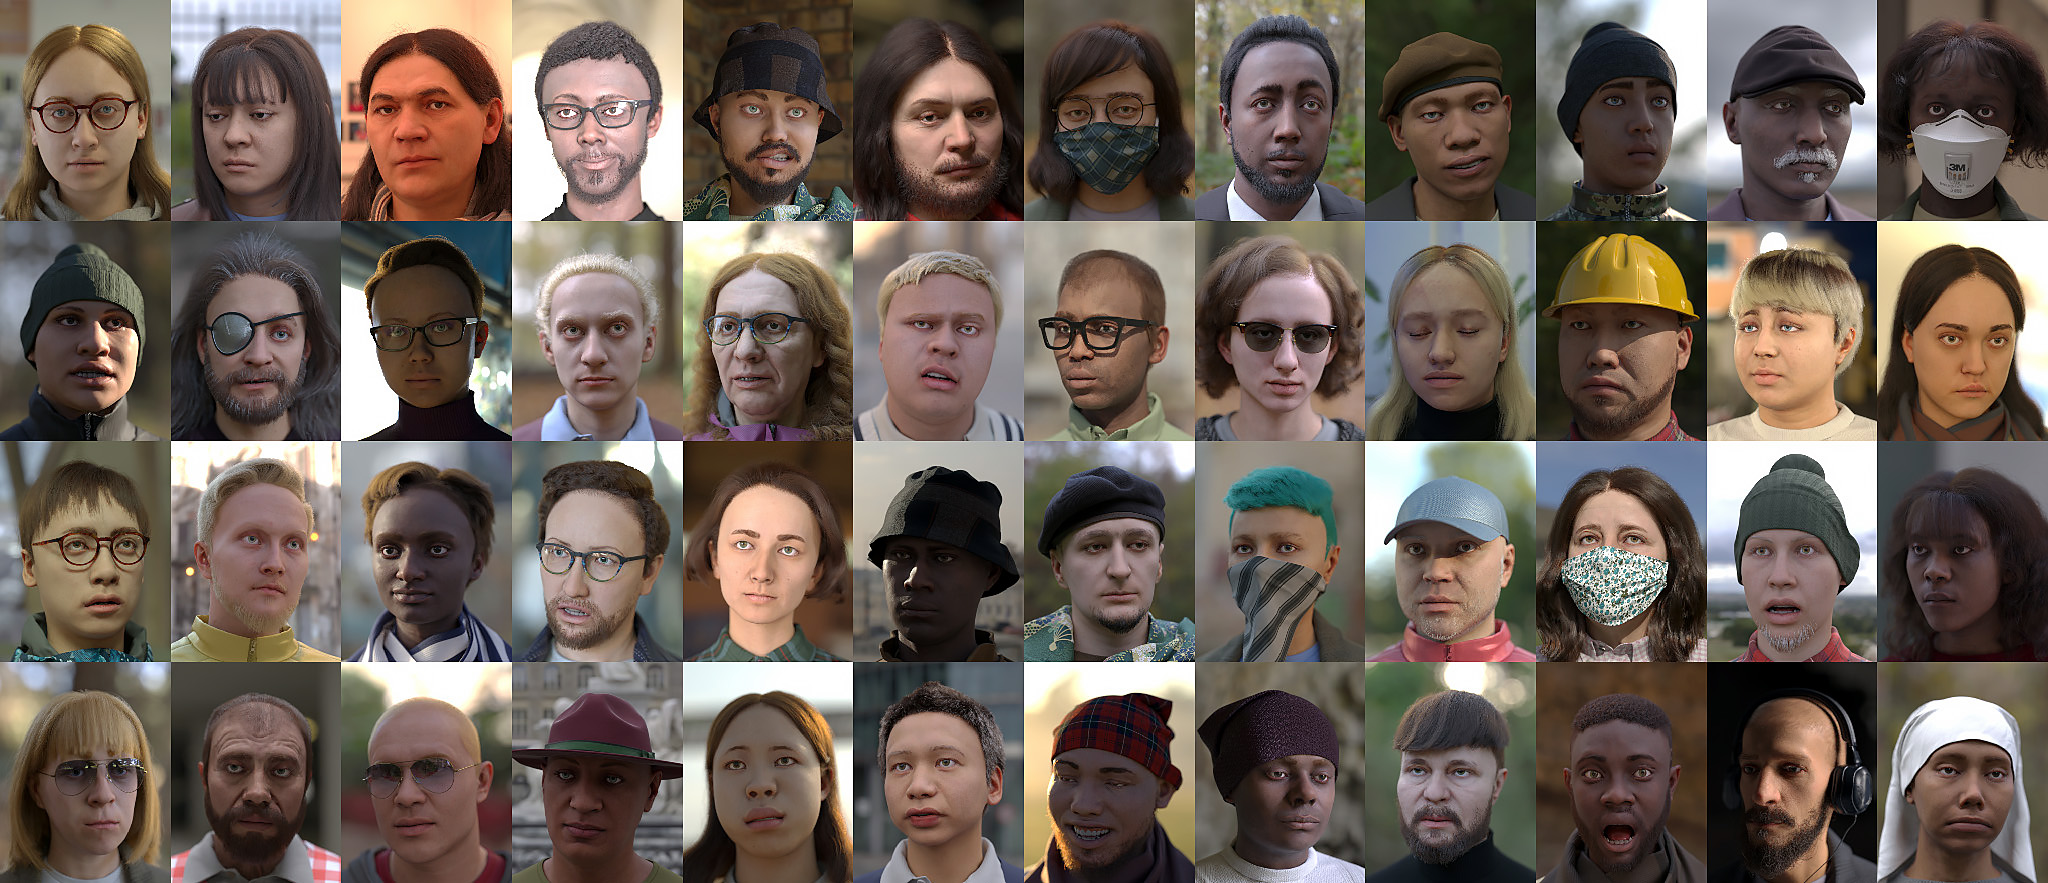 Example Faces which are all rendered